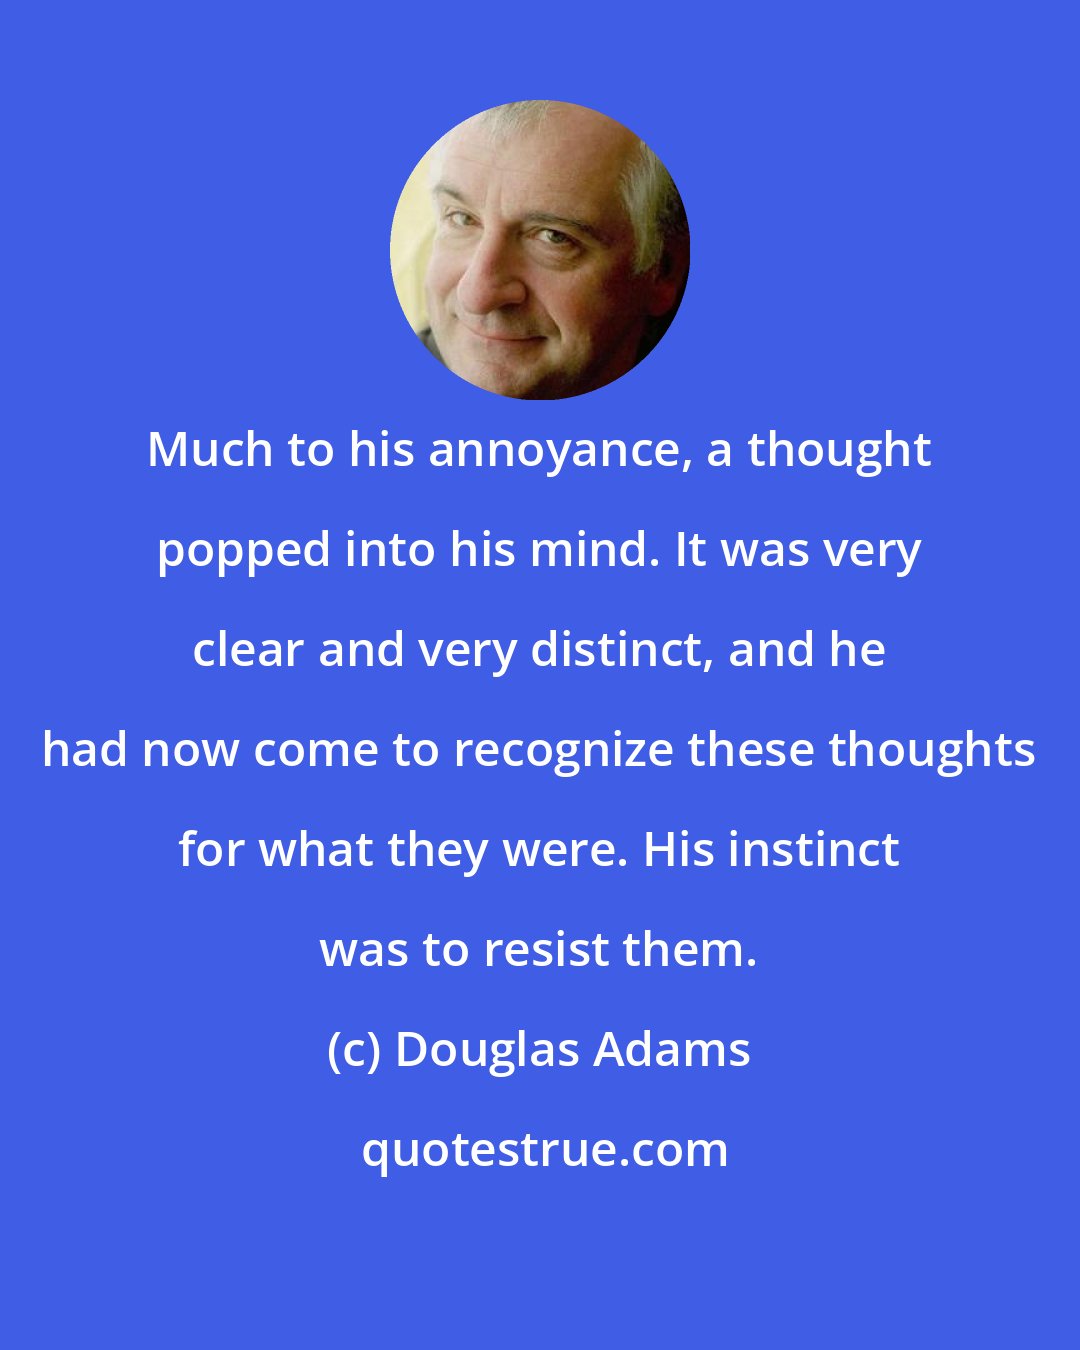 Douglas Adams: Much to his annoyance, a thought popped into his mind. It was very clear and very distinct, and he had now come to recognize these thoughts for what they were. His instinct was to resist them.